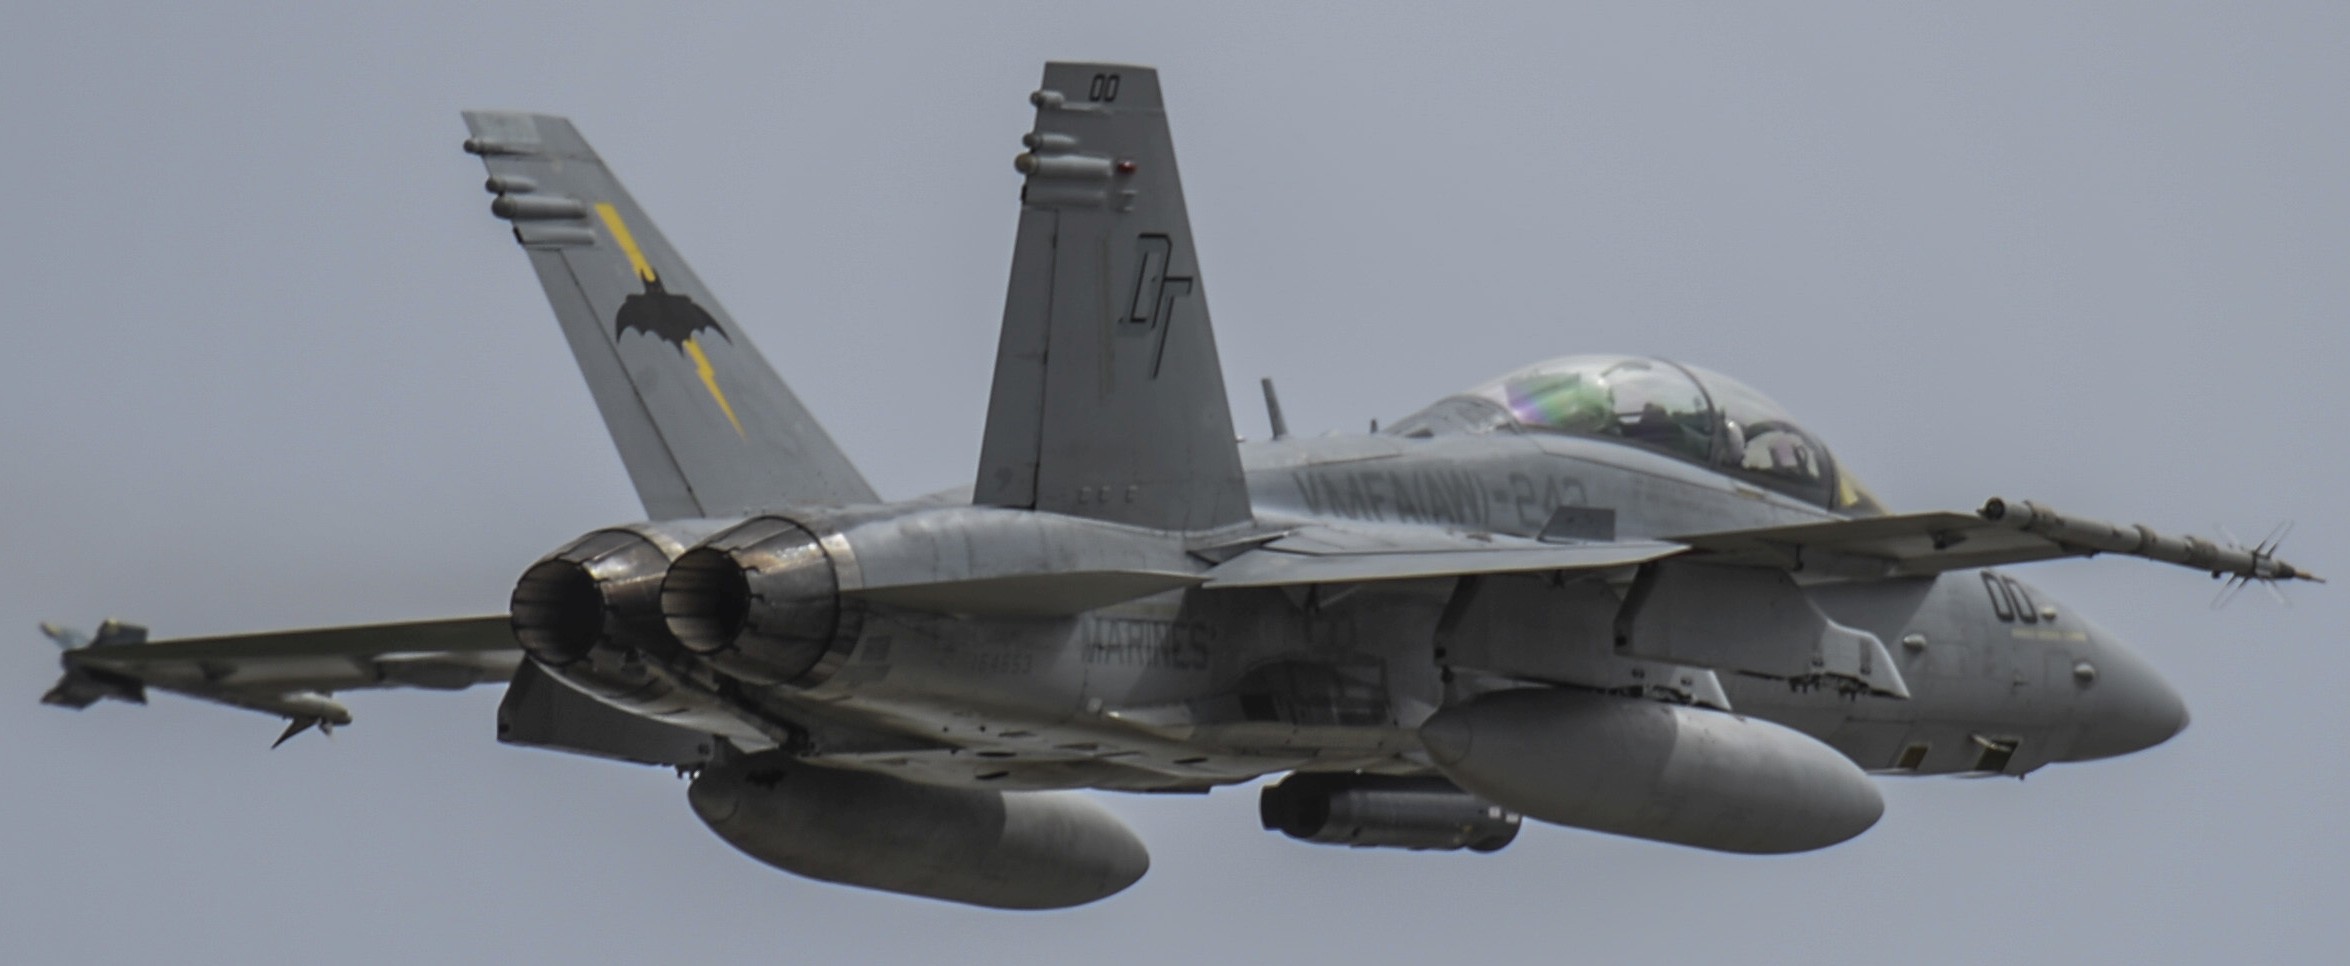 vmfa(aw)-242 bats marine all-weather fighter attack squadron usmc f/a-18d hornet 62 valiant shield 2016